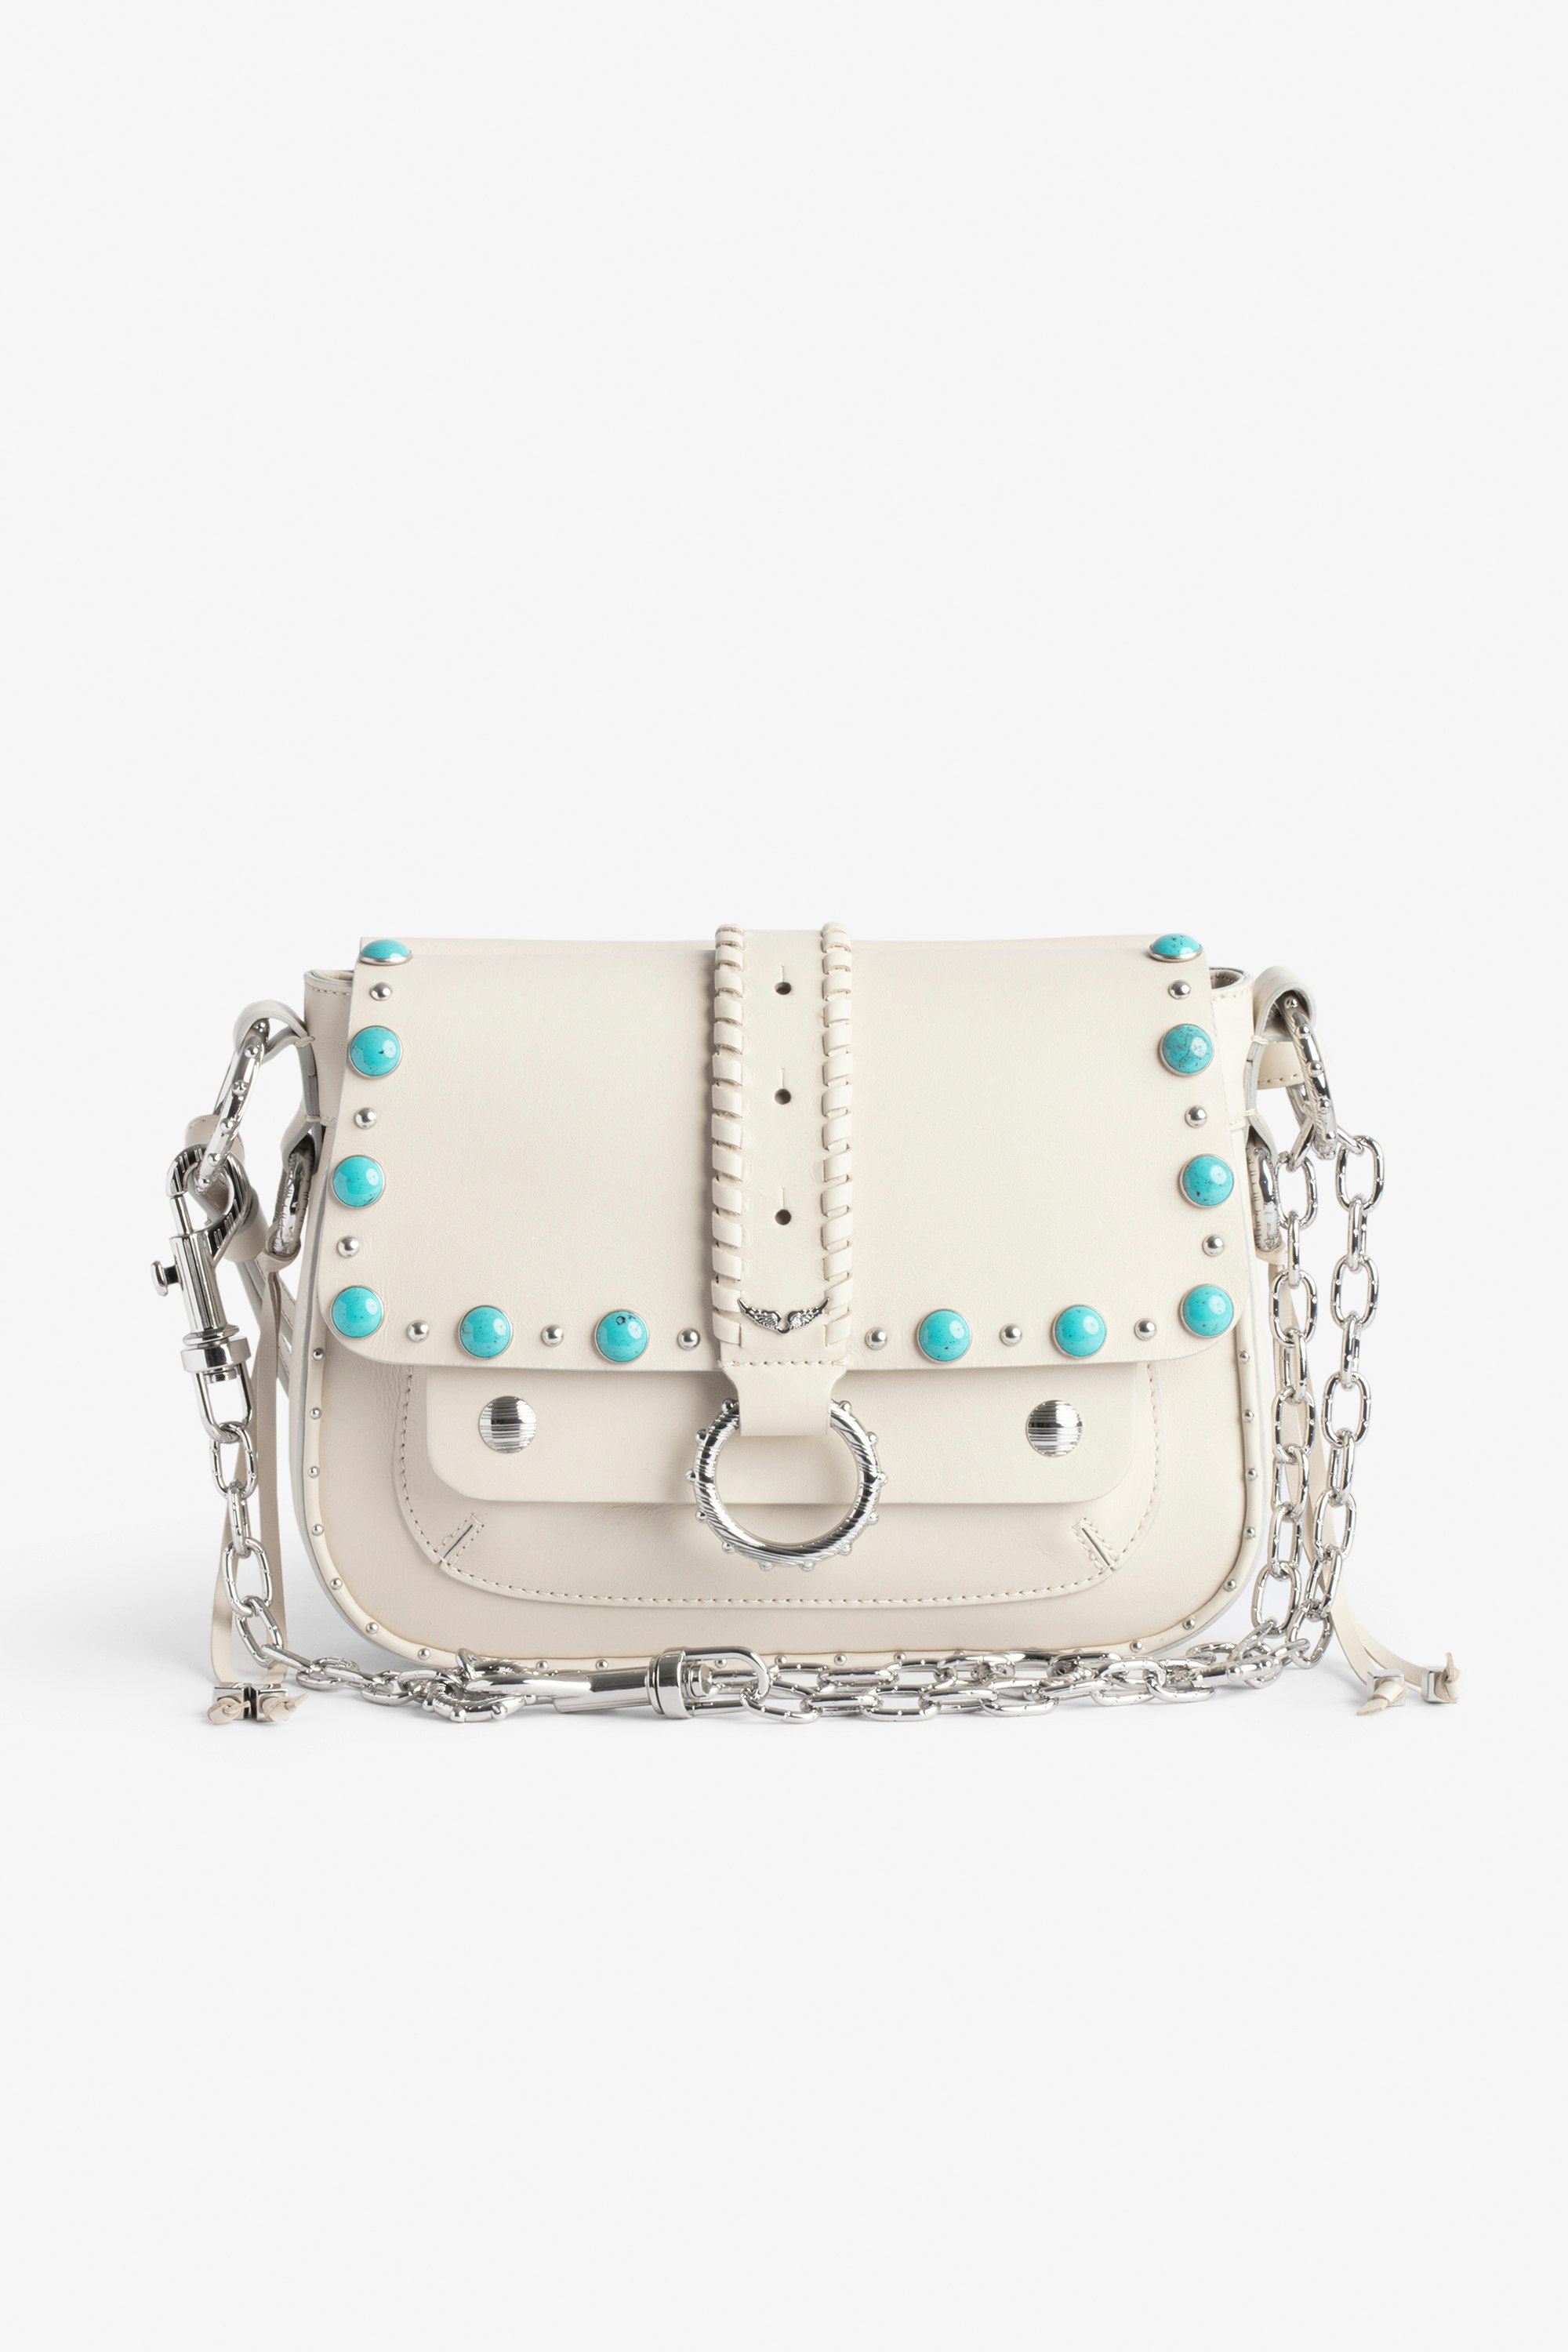 Kate Bag Women's shoulder bag in ecru leather studded with turquoise gems